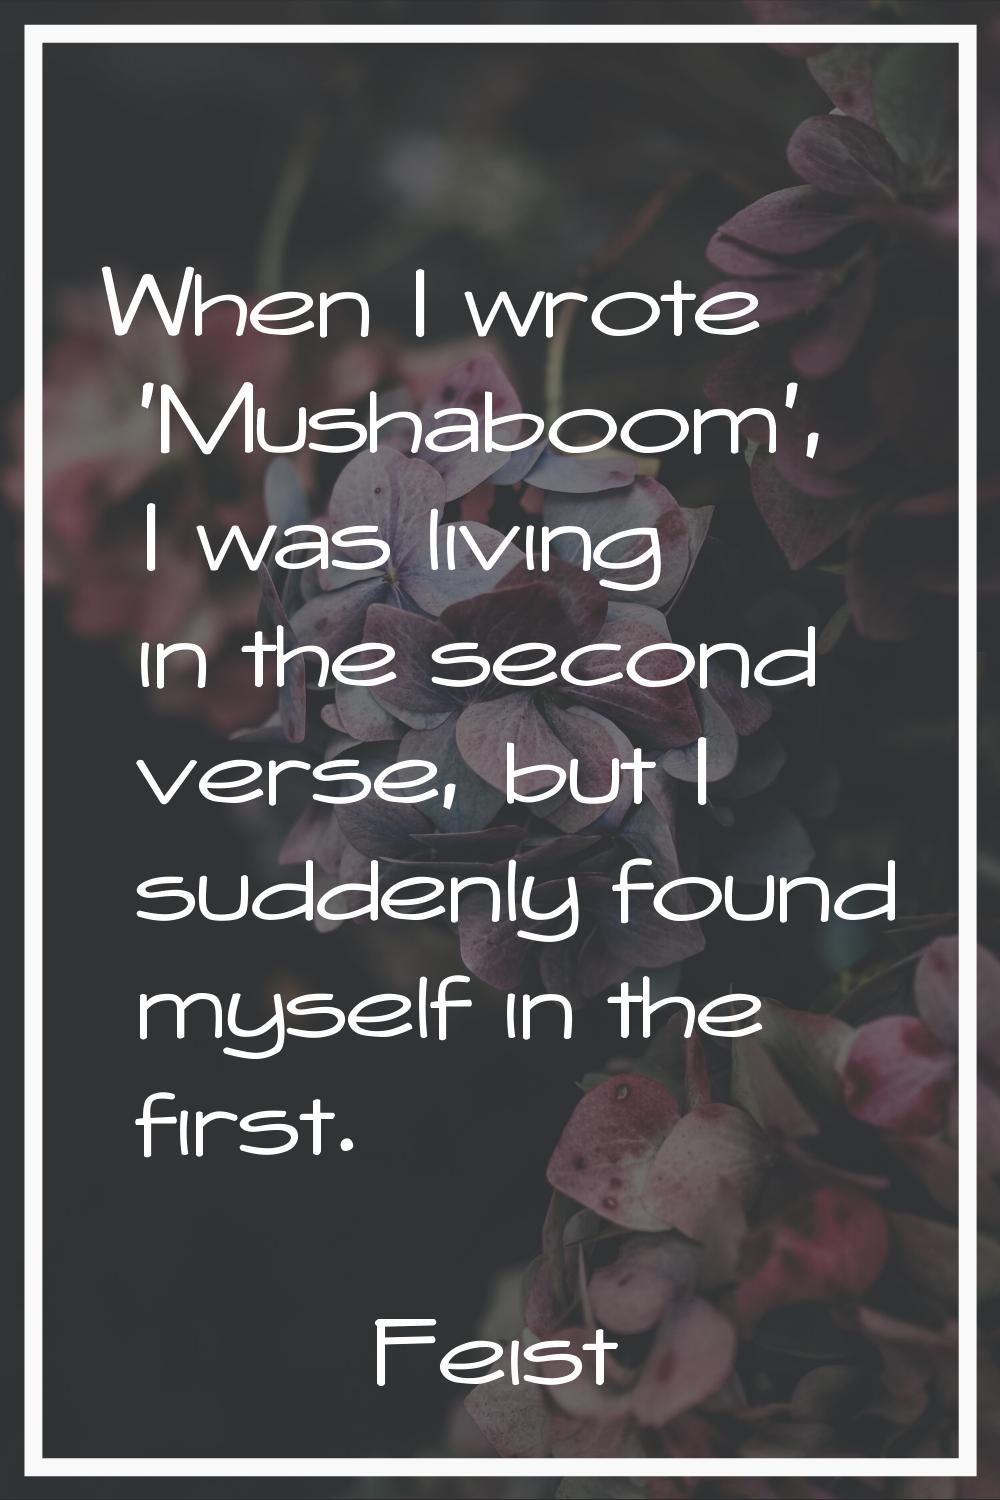 When I wrote 'Mushaboom', I was living in the second verse, but I suddenly found myself in the firs